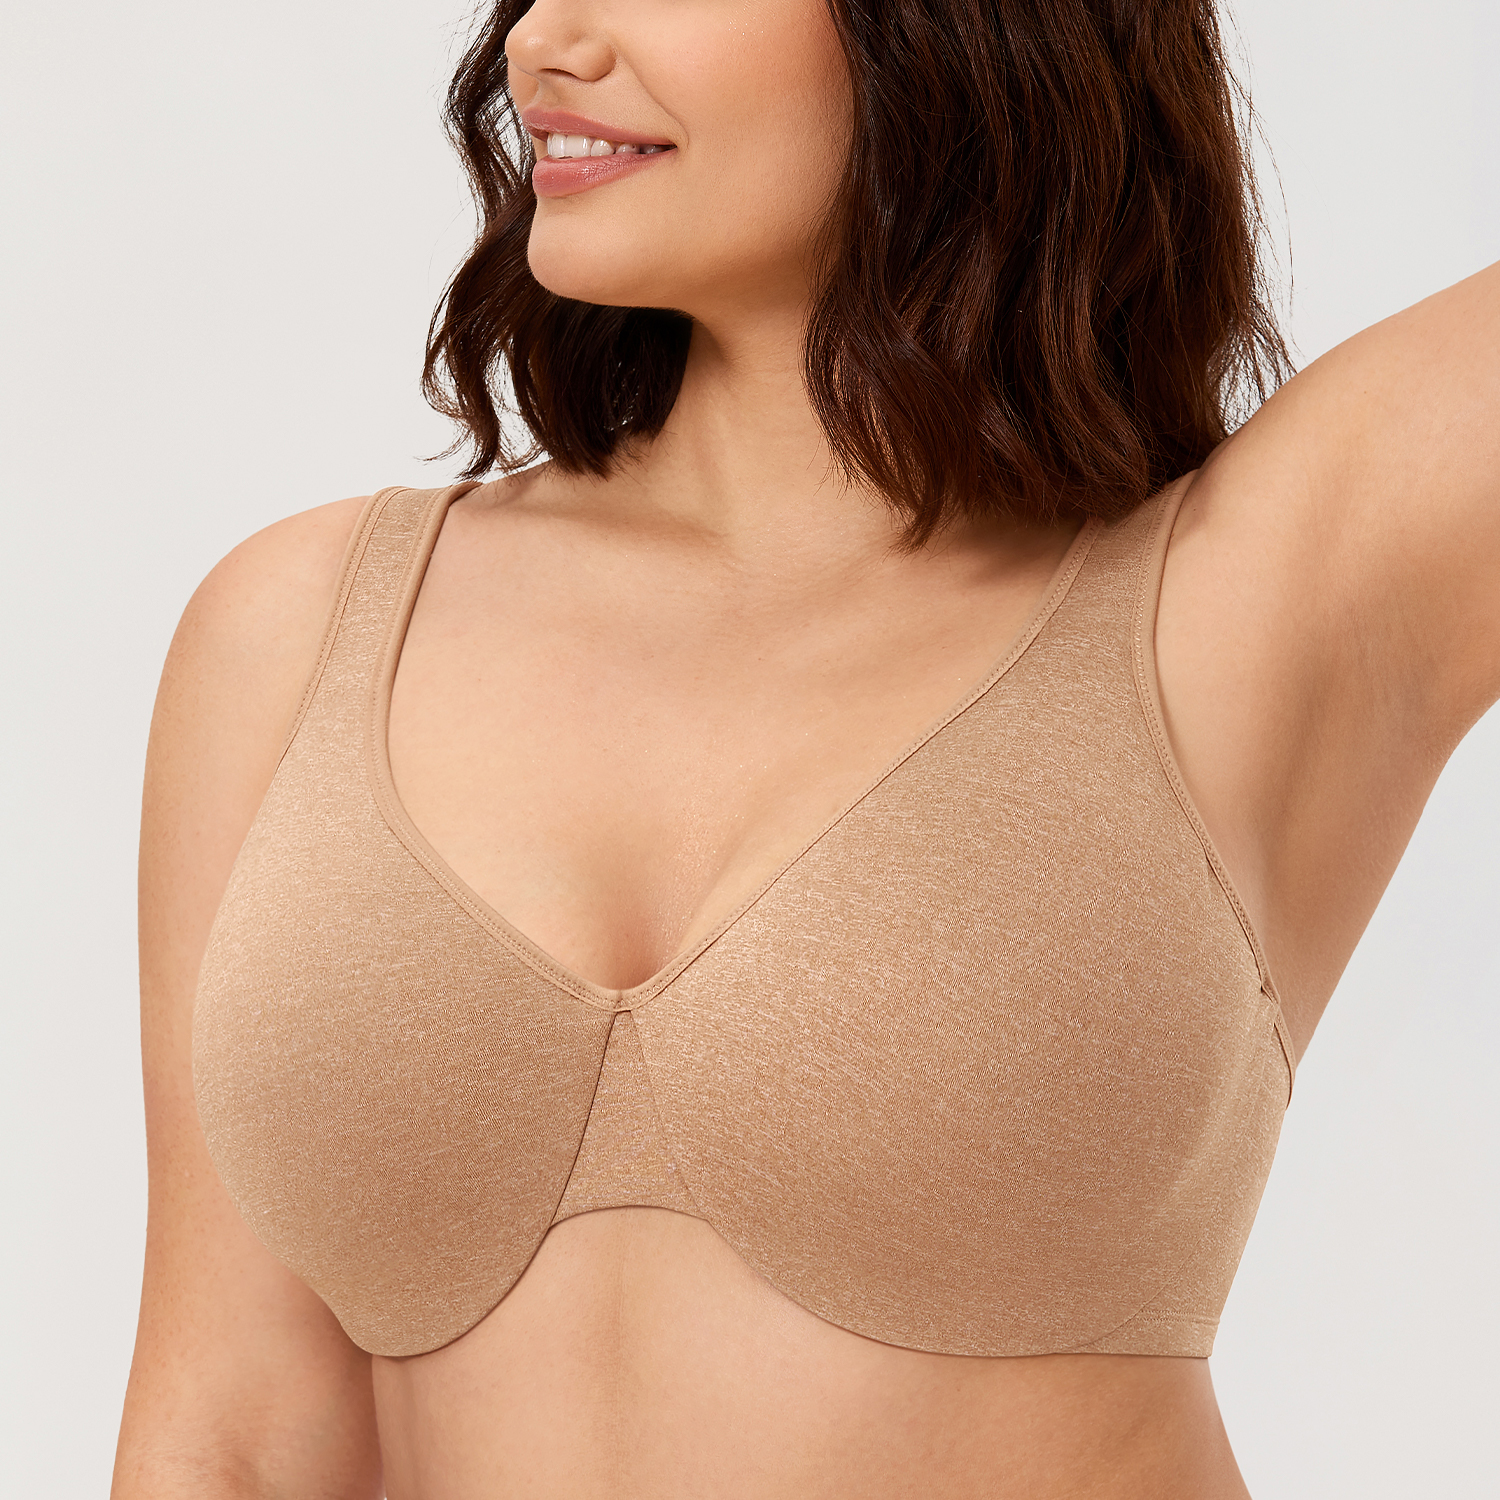 Buy Delimira Women's Full Coverage Underwire Non-Padded